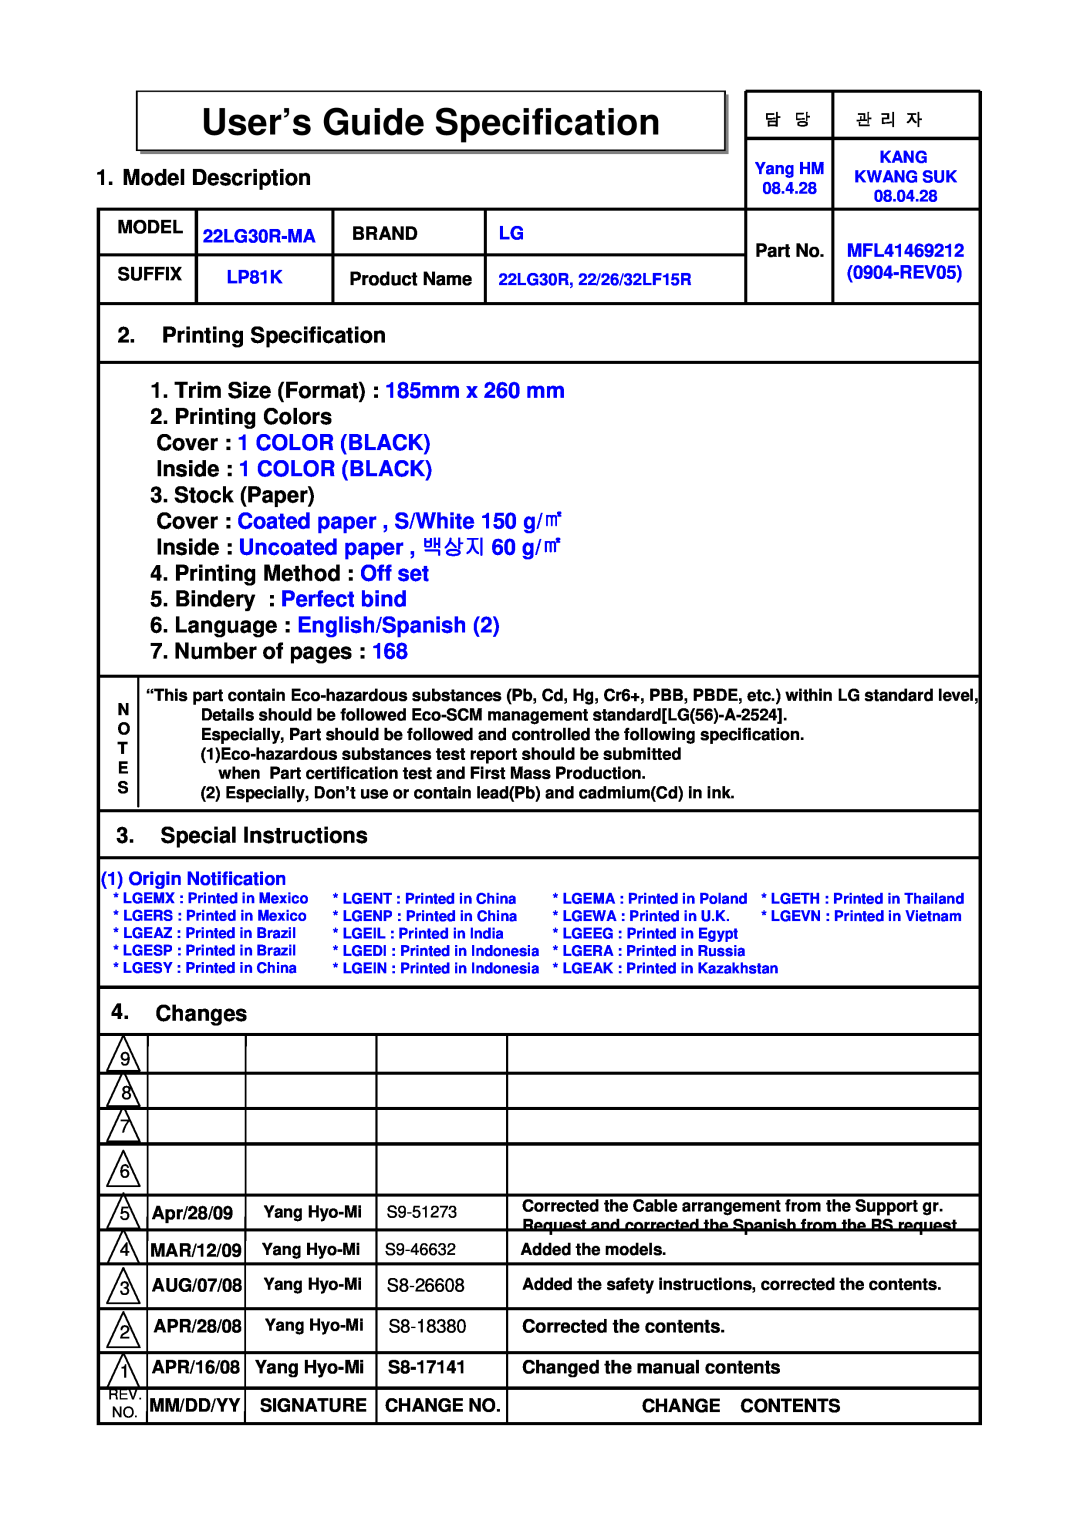 LG Electronics 2230R-MA manual Model Description, Printing Specification 1. Trim Size Format 185mm x 260 mm, Stock Paper 